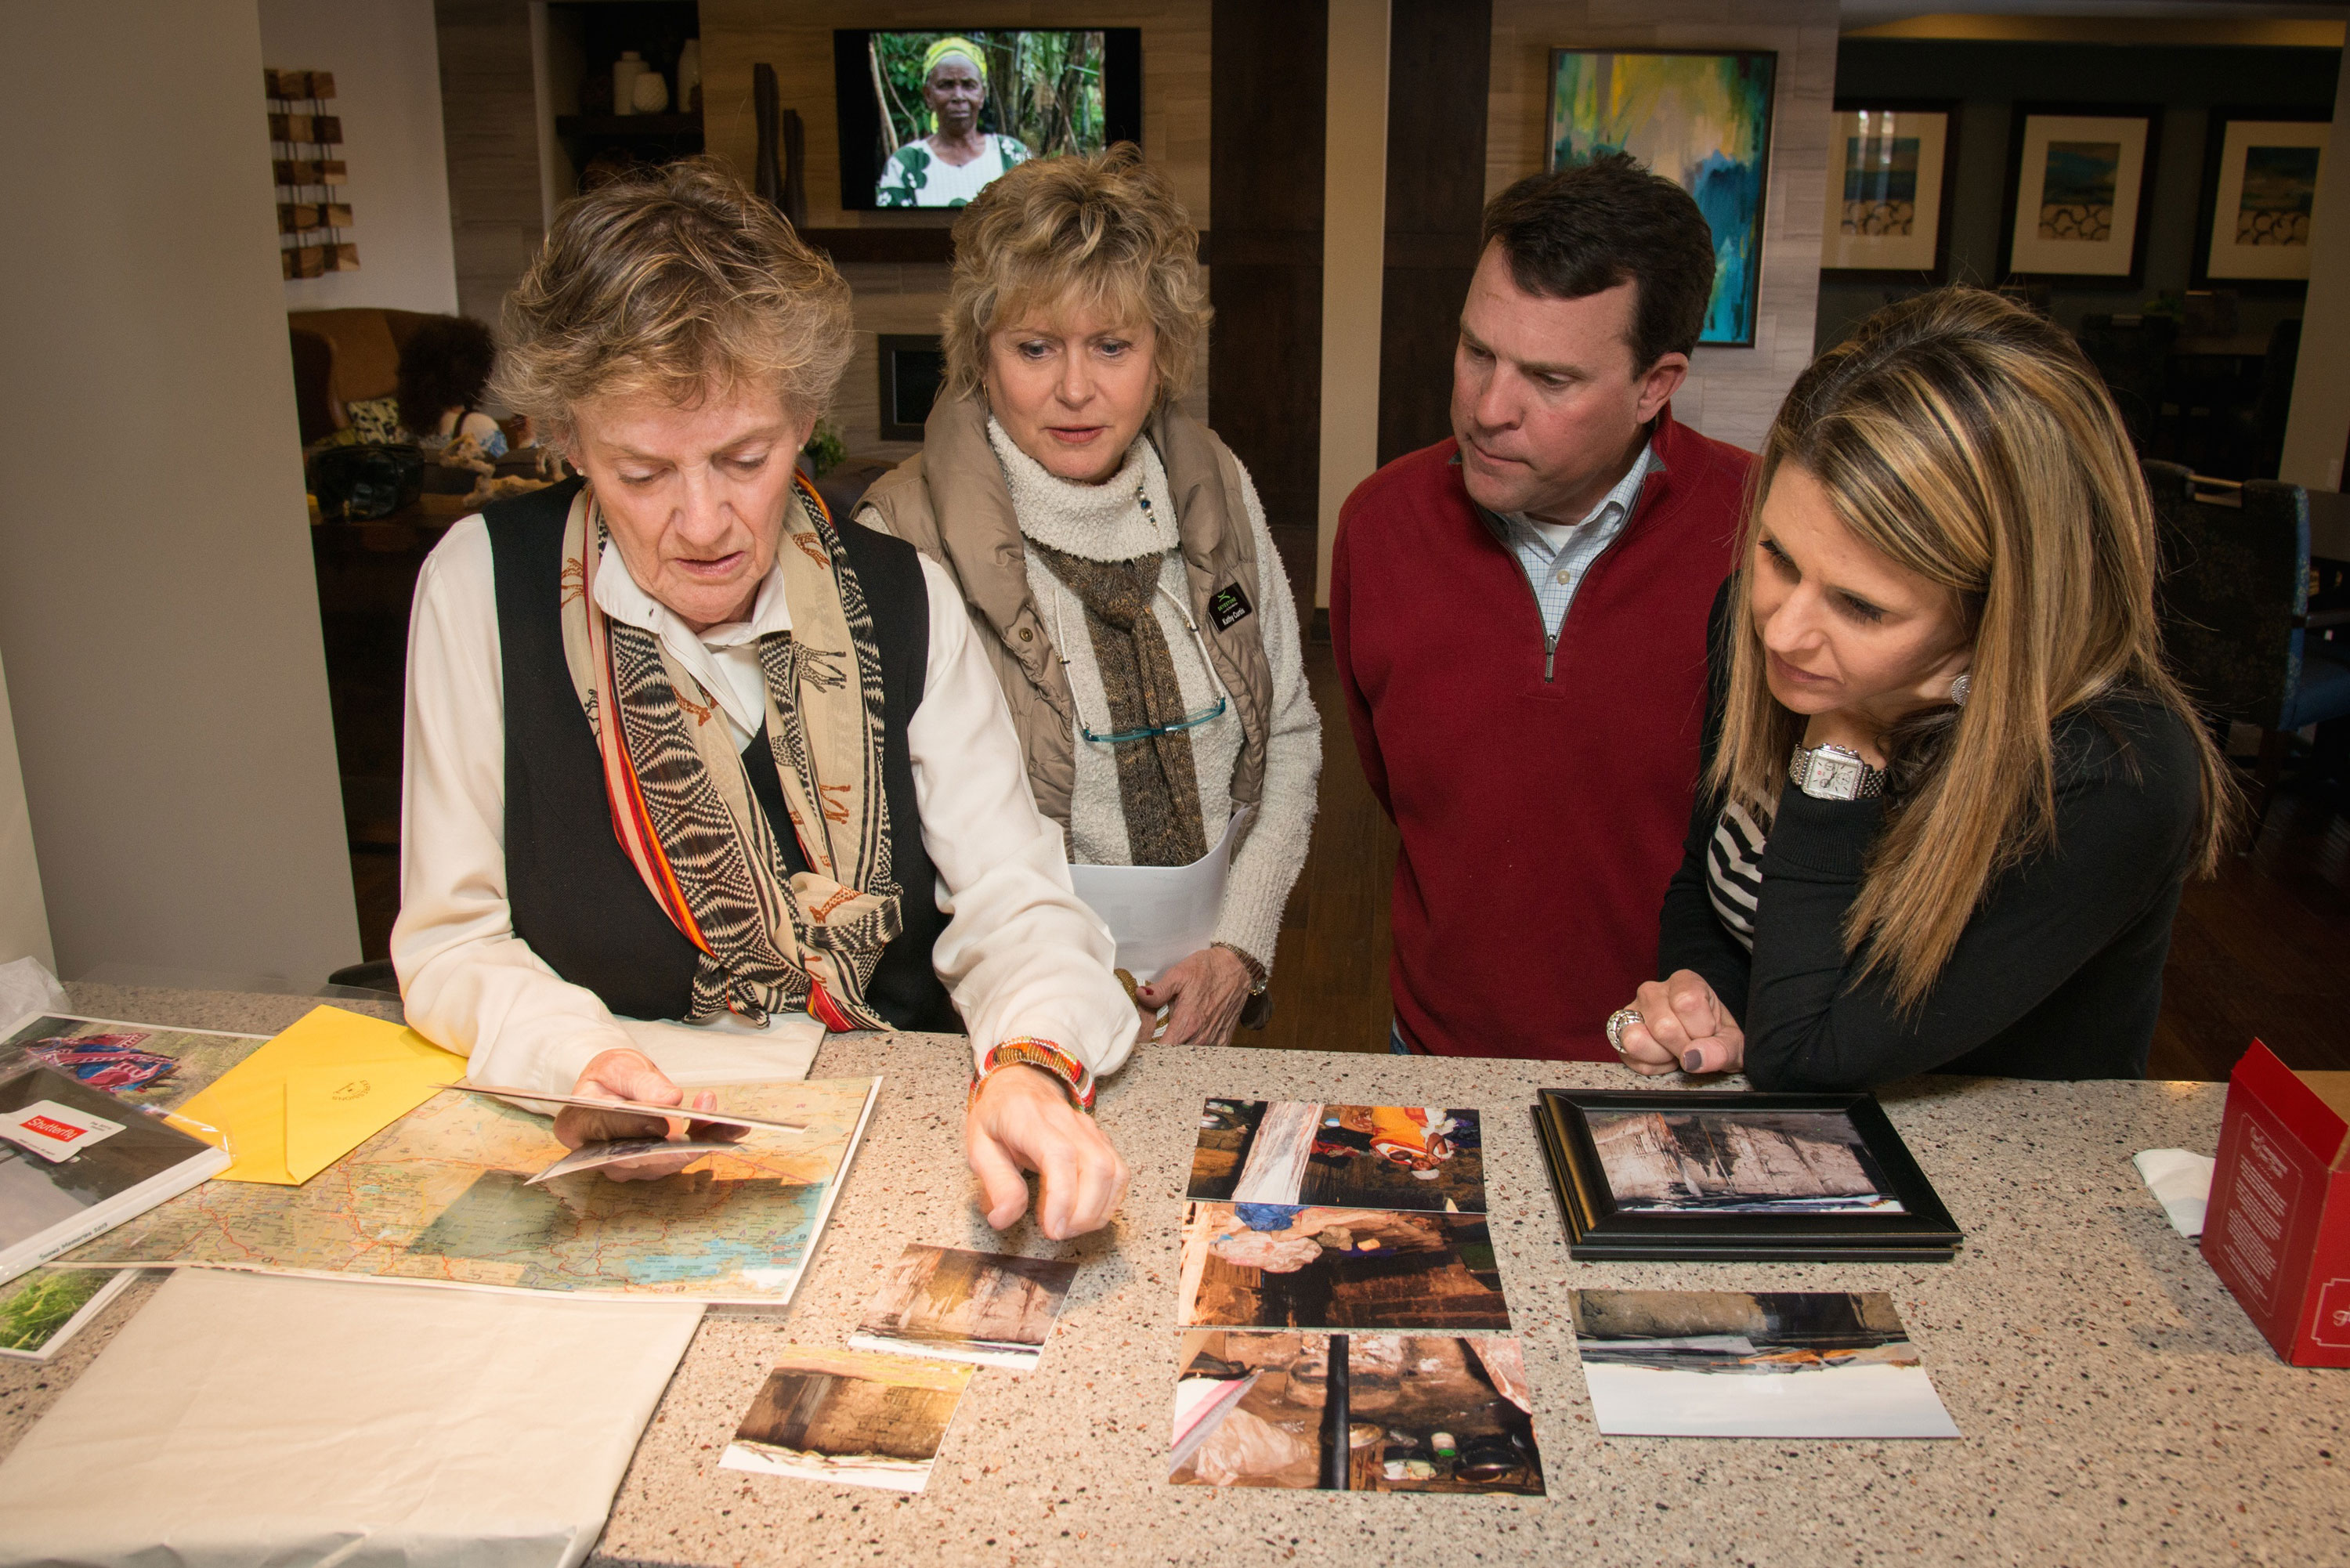 Judy Pitt shows the Taylor Morrison Denver team photos from her humanitarian travels to Kenya.